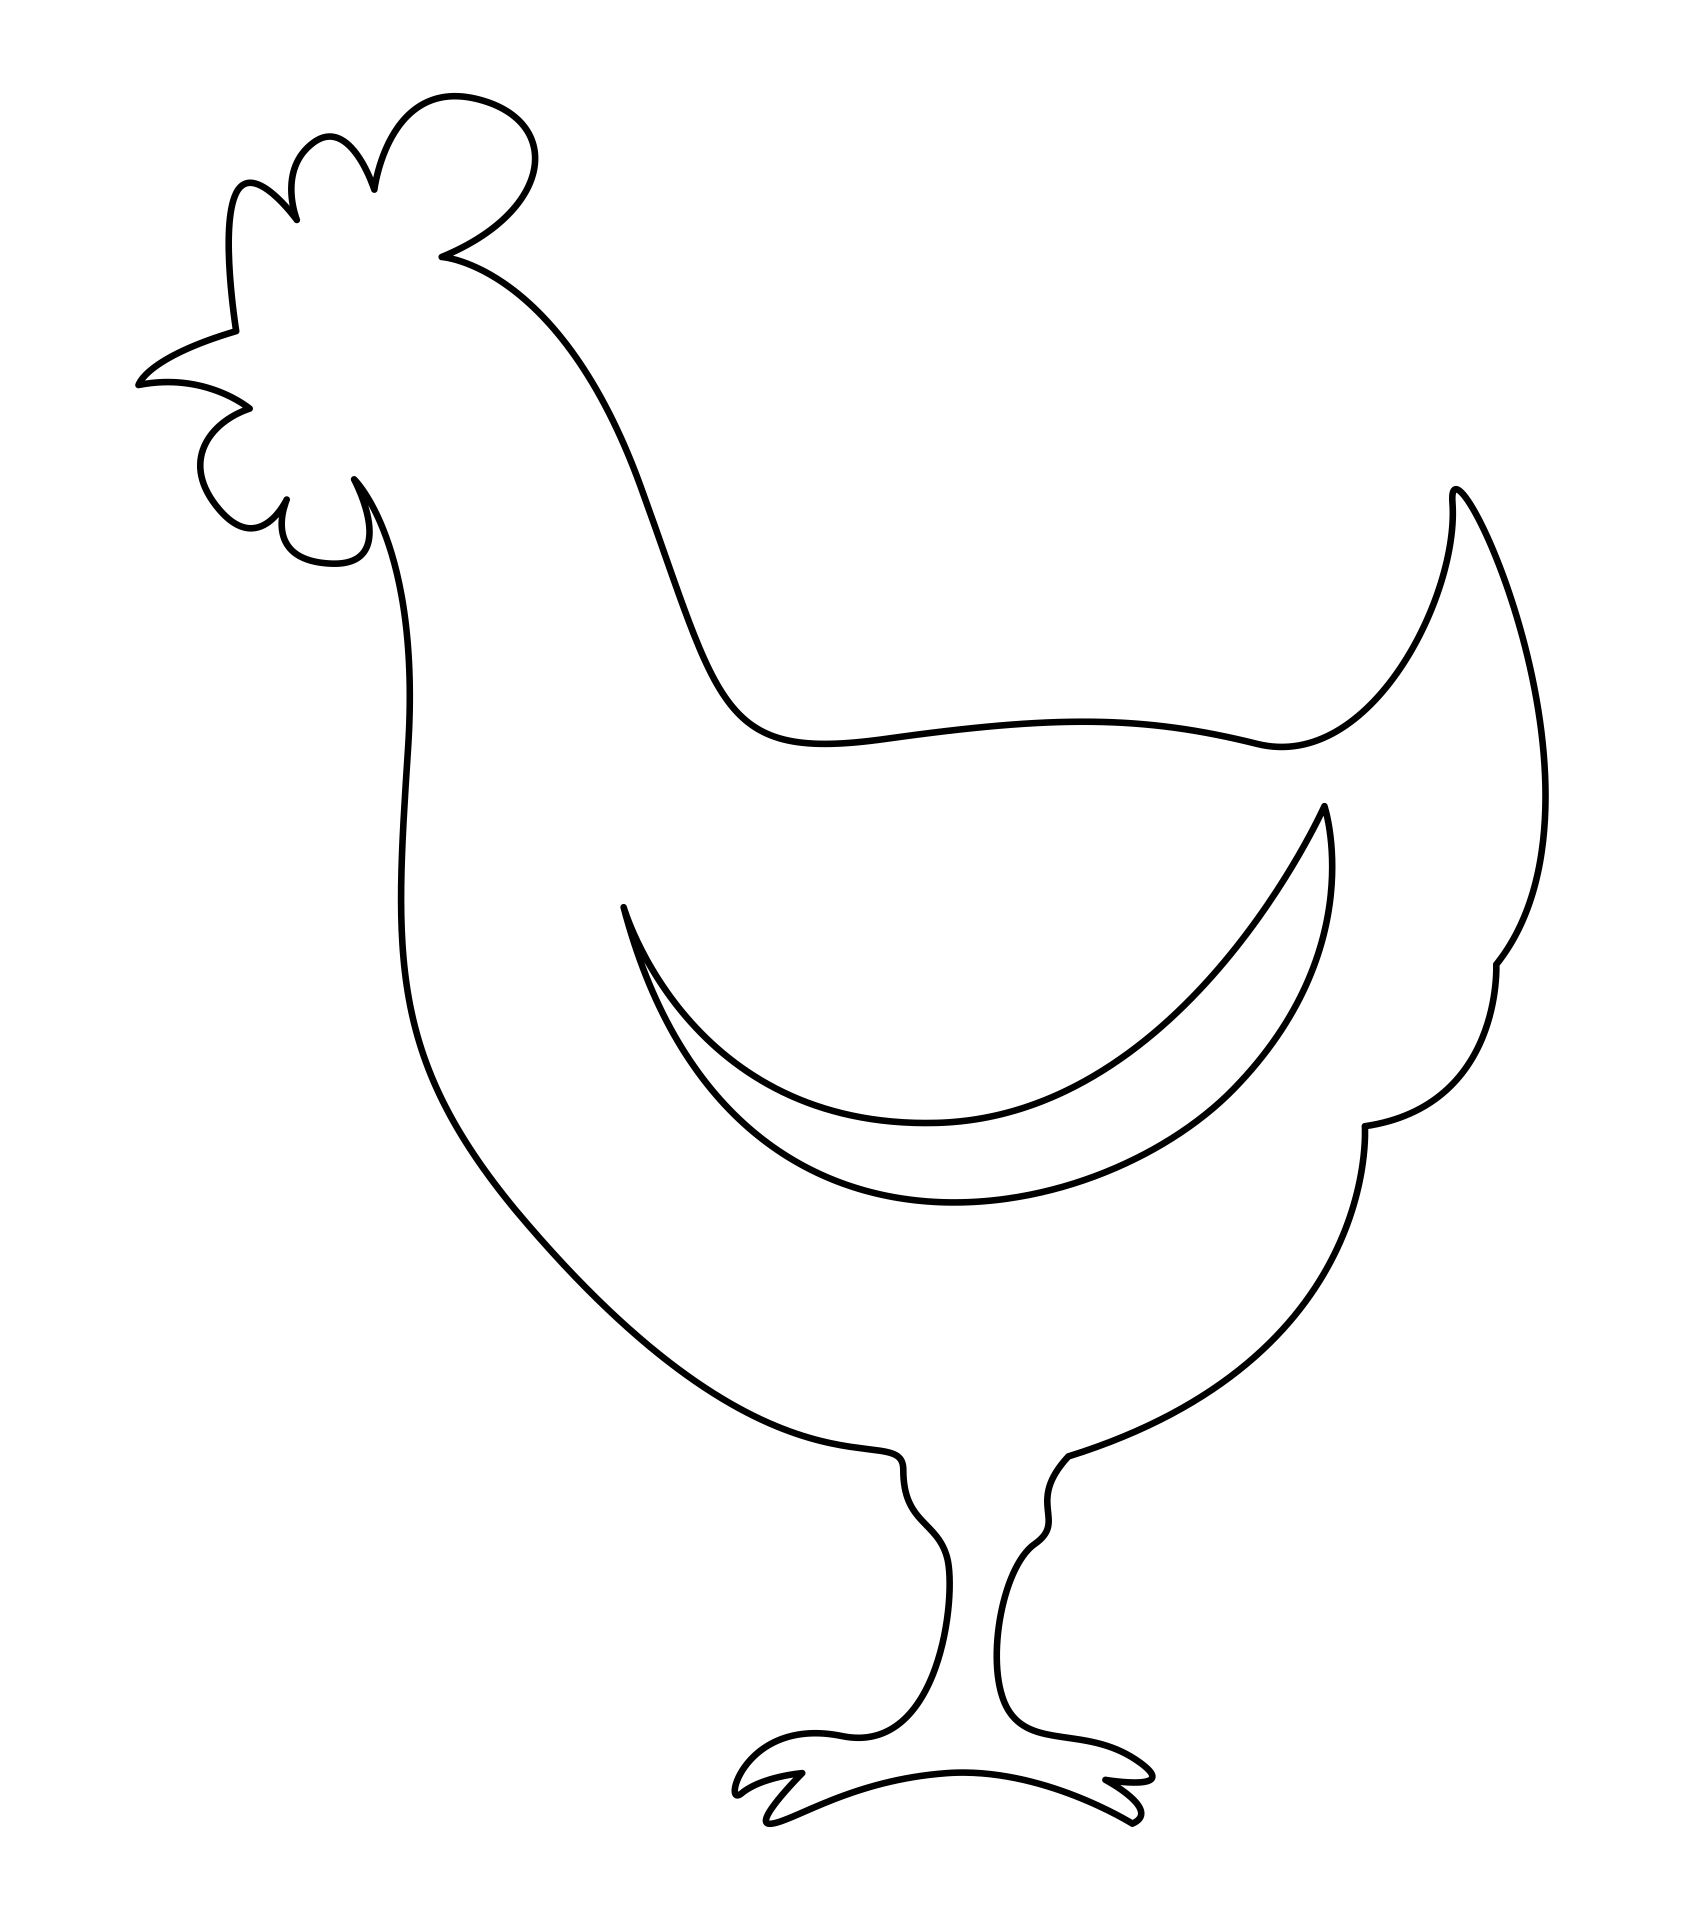 9-best-images-of-chicken-stencils-free-printable-free-printable-chicken-stencils-free